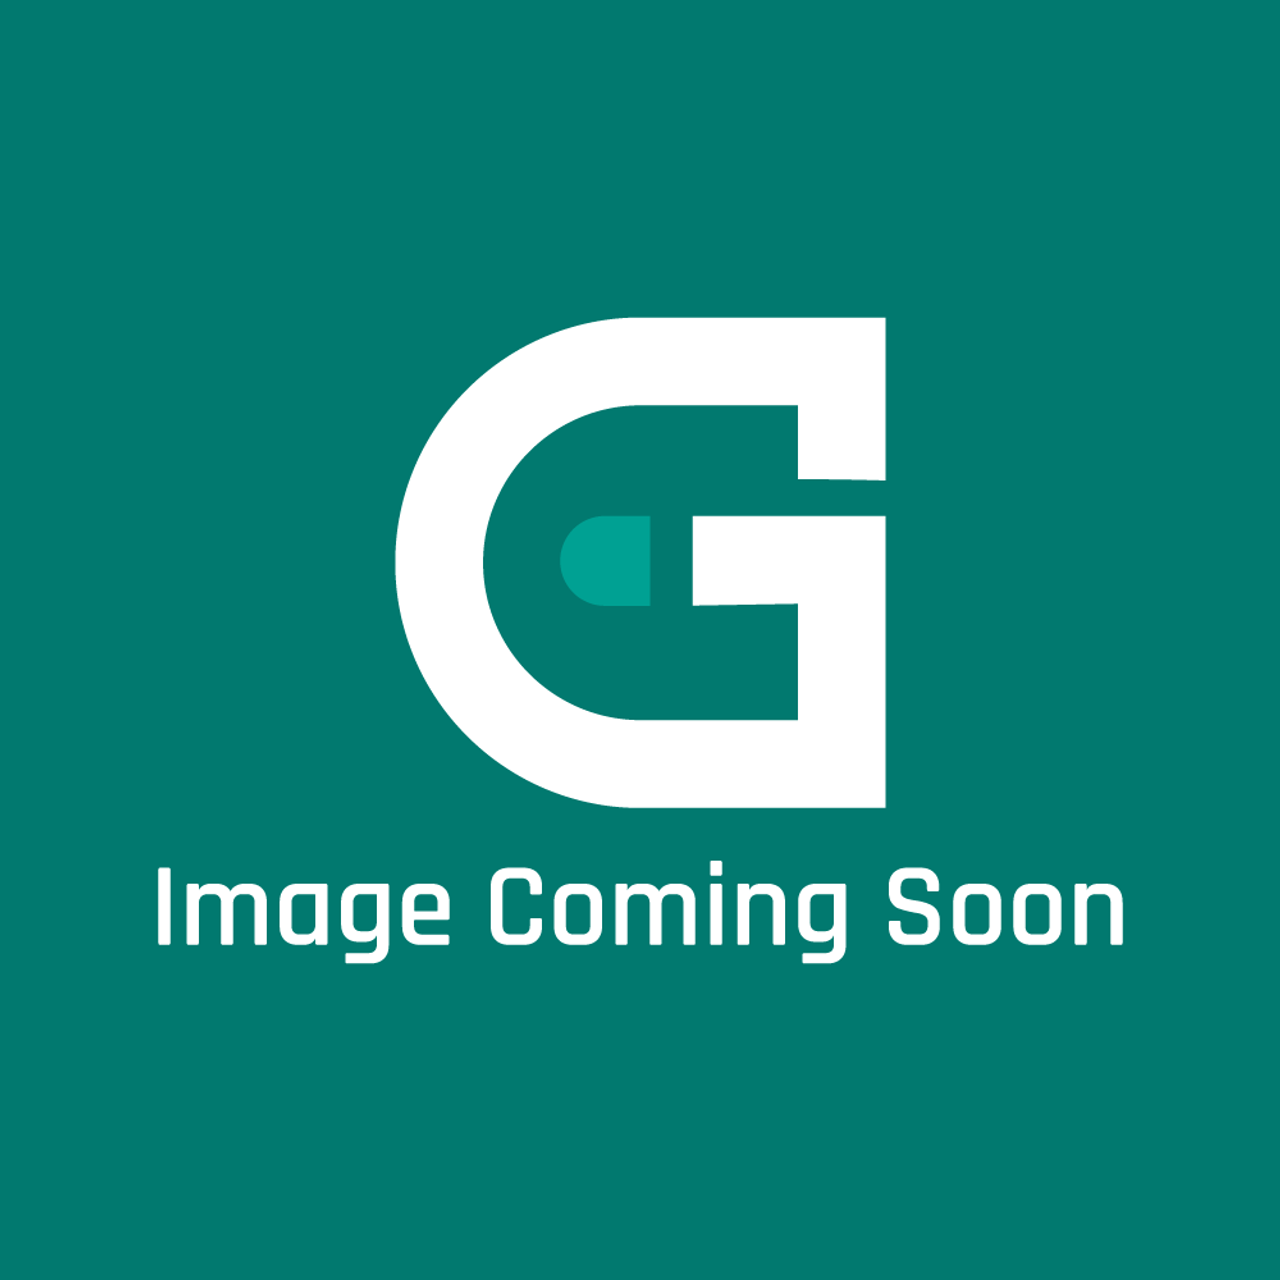 Star Mfg A5Z16645 - Side Panel 14 W-Sn Plate - Image Coming Soon!